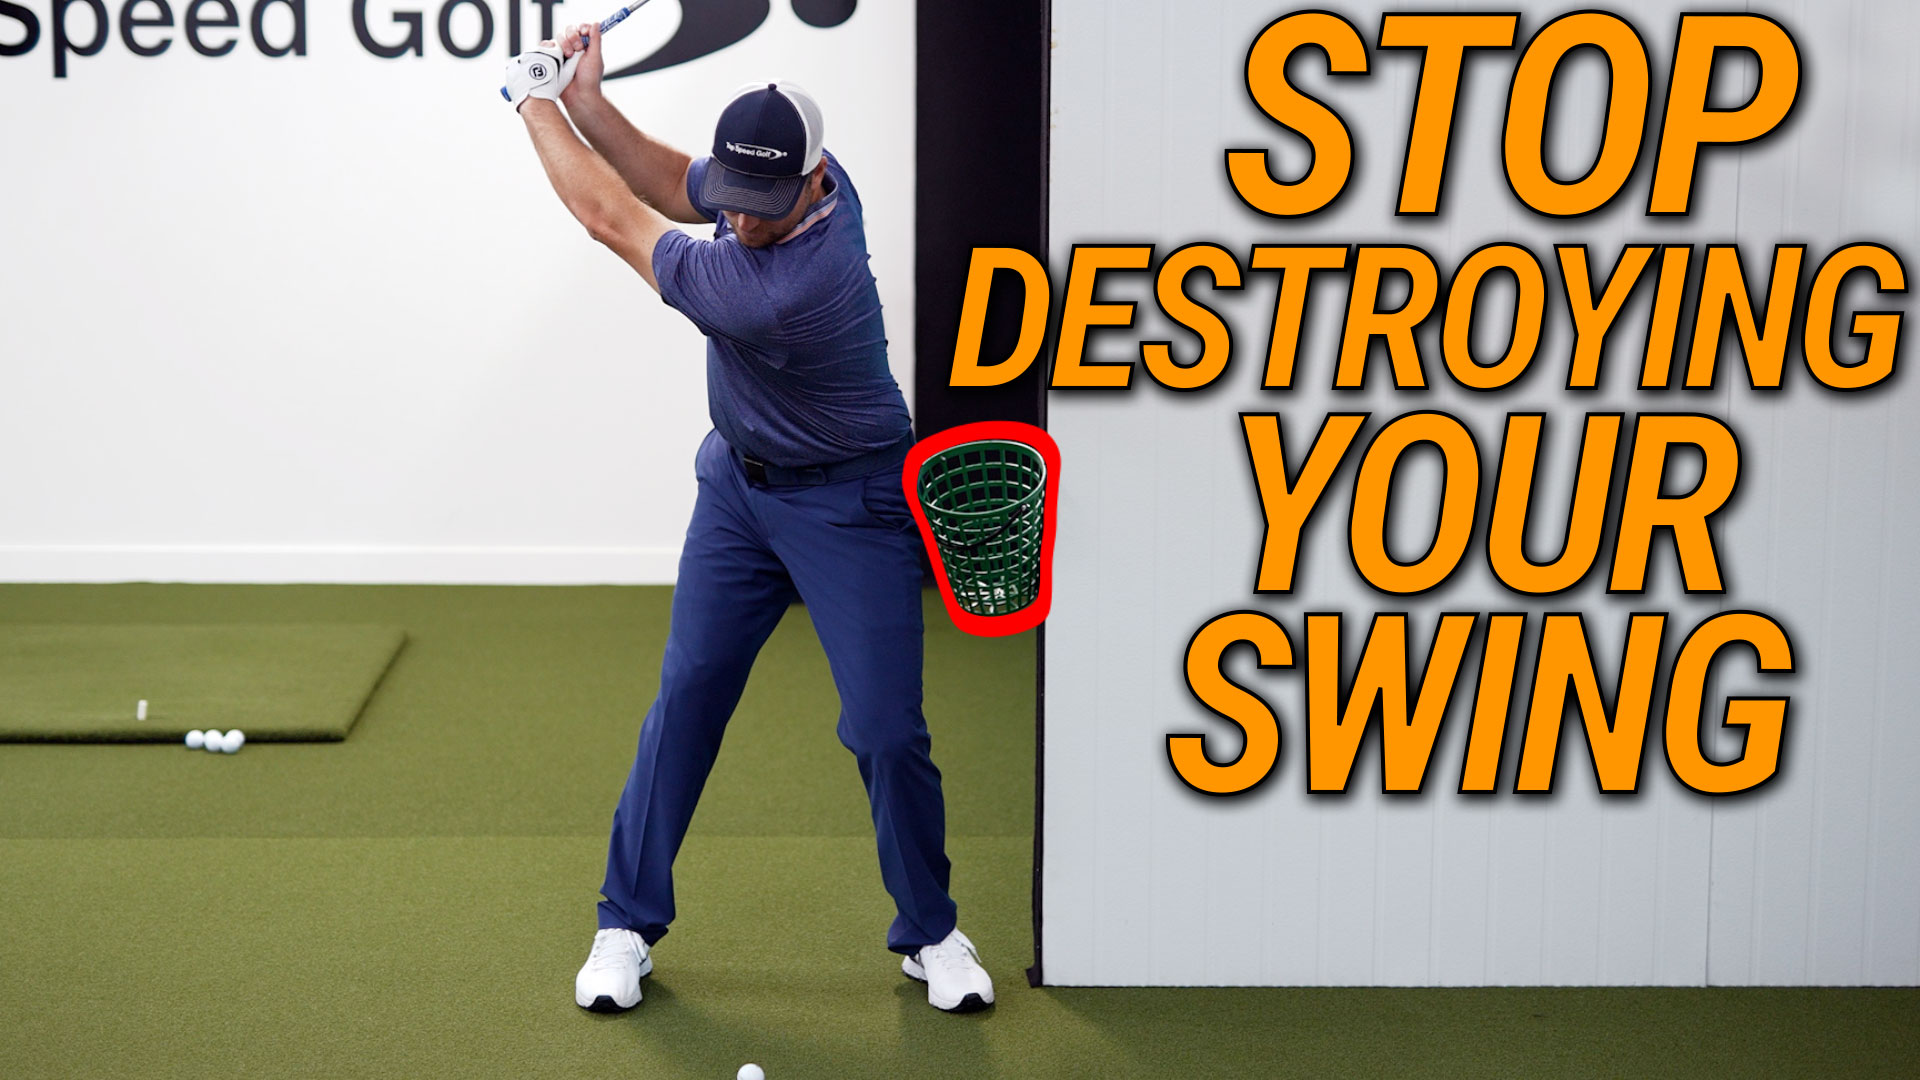 This Move Is Destroying Your Golf Swing! • Top Speed Golf